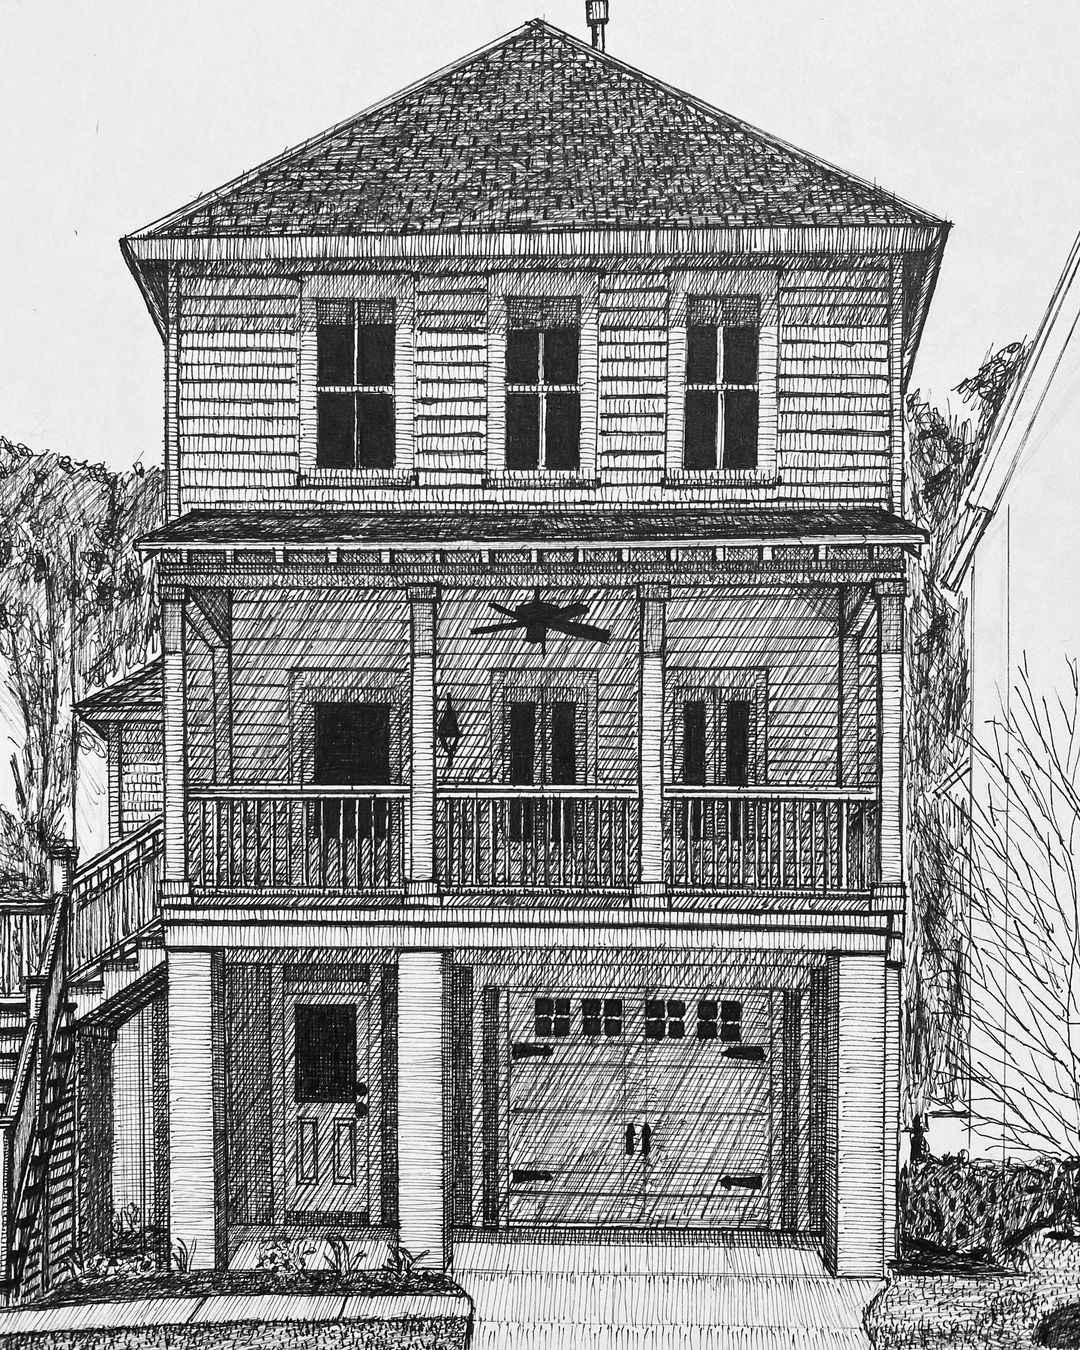 Drawing of a large house by Austin Brague. It is in black and white.